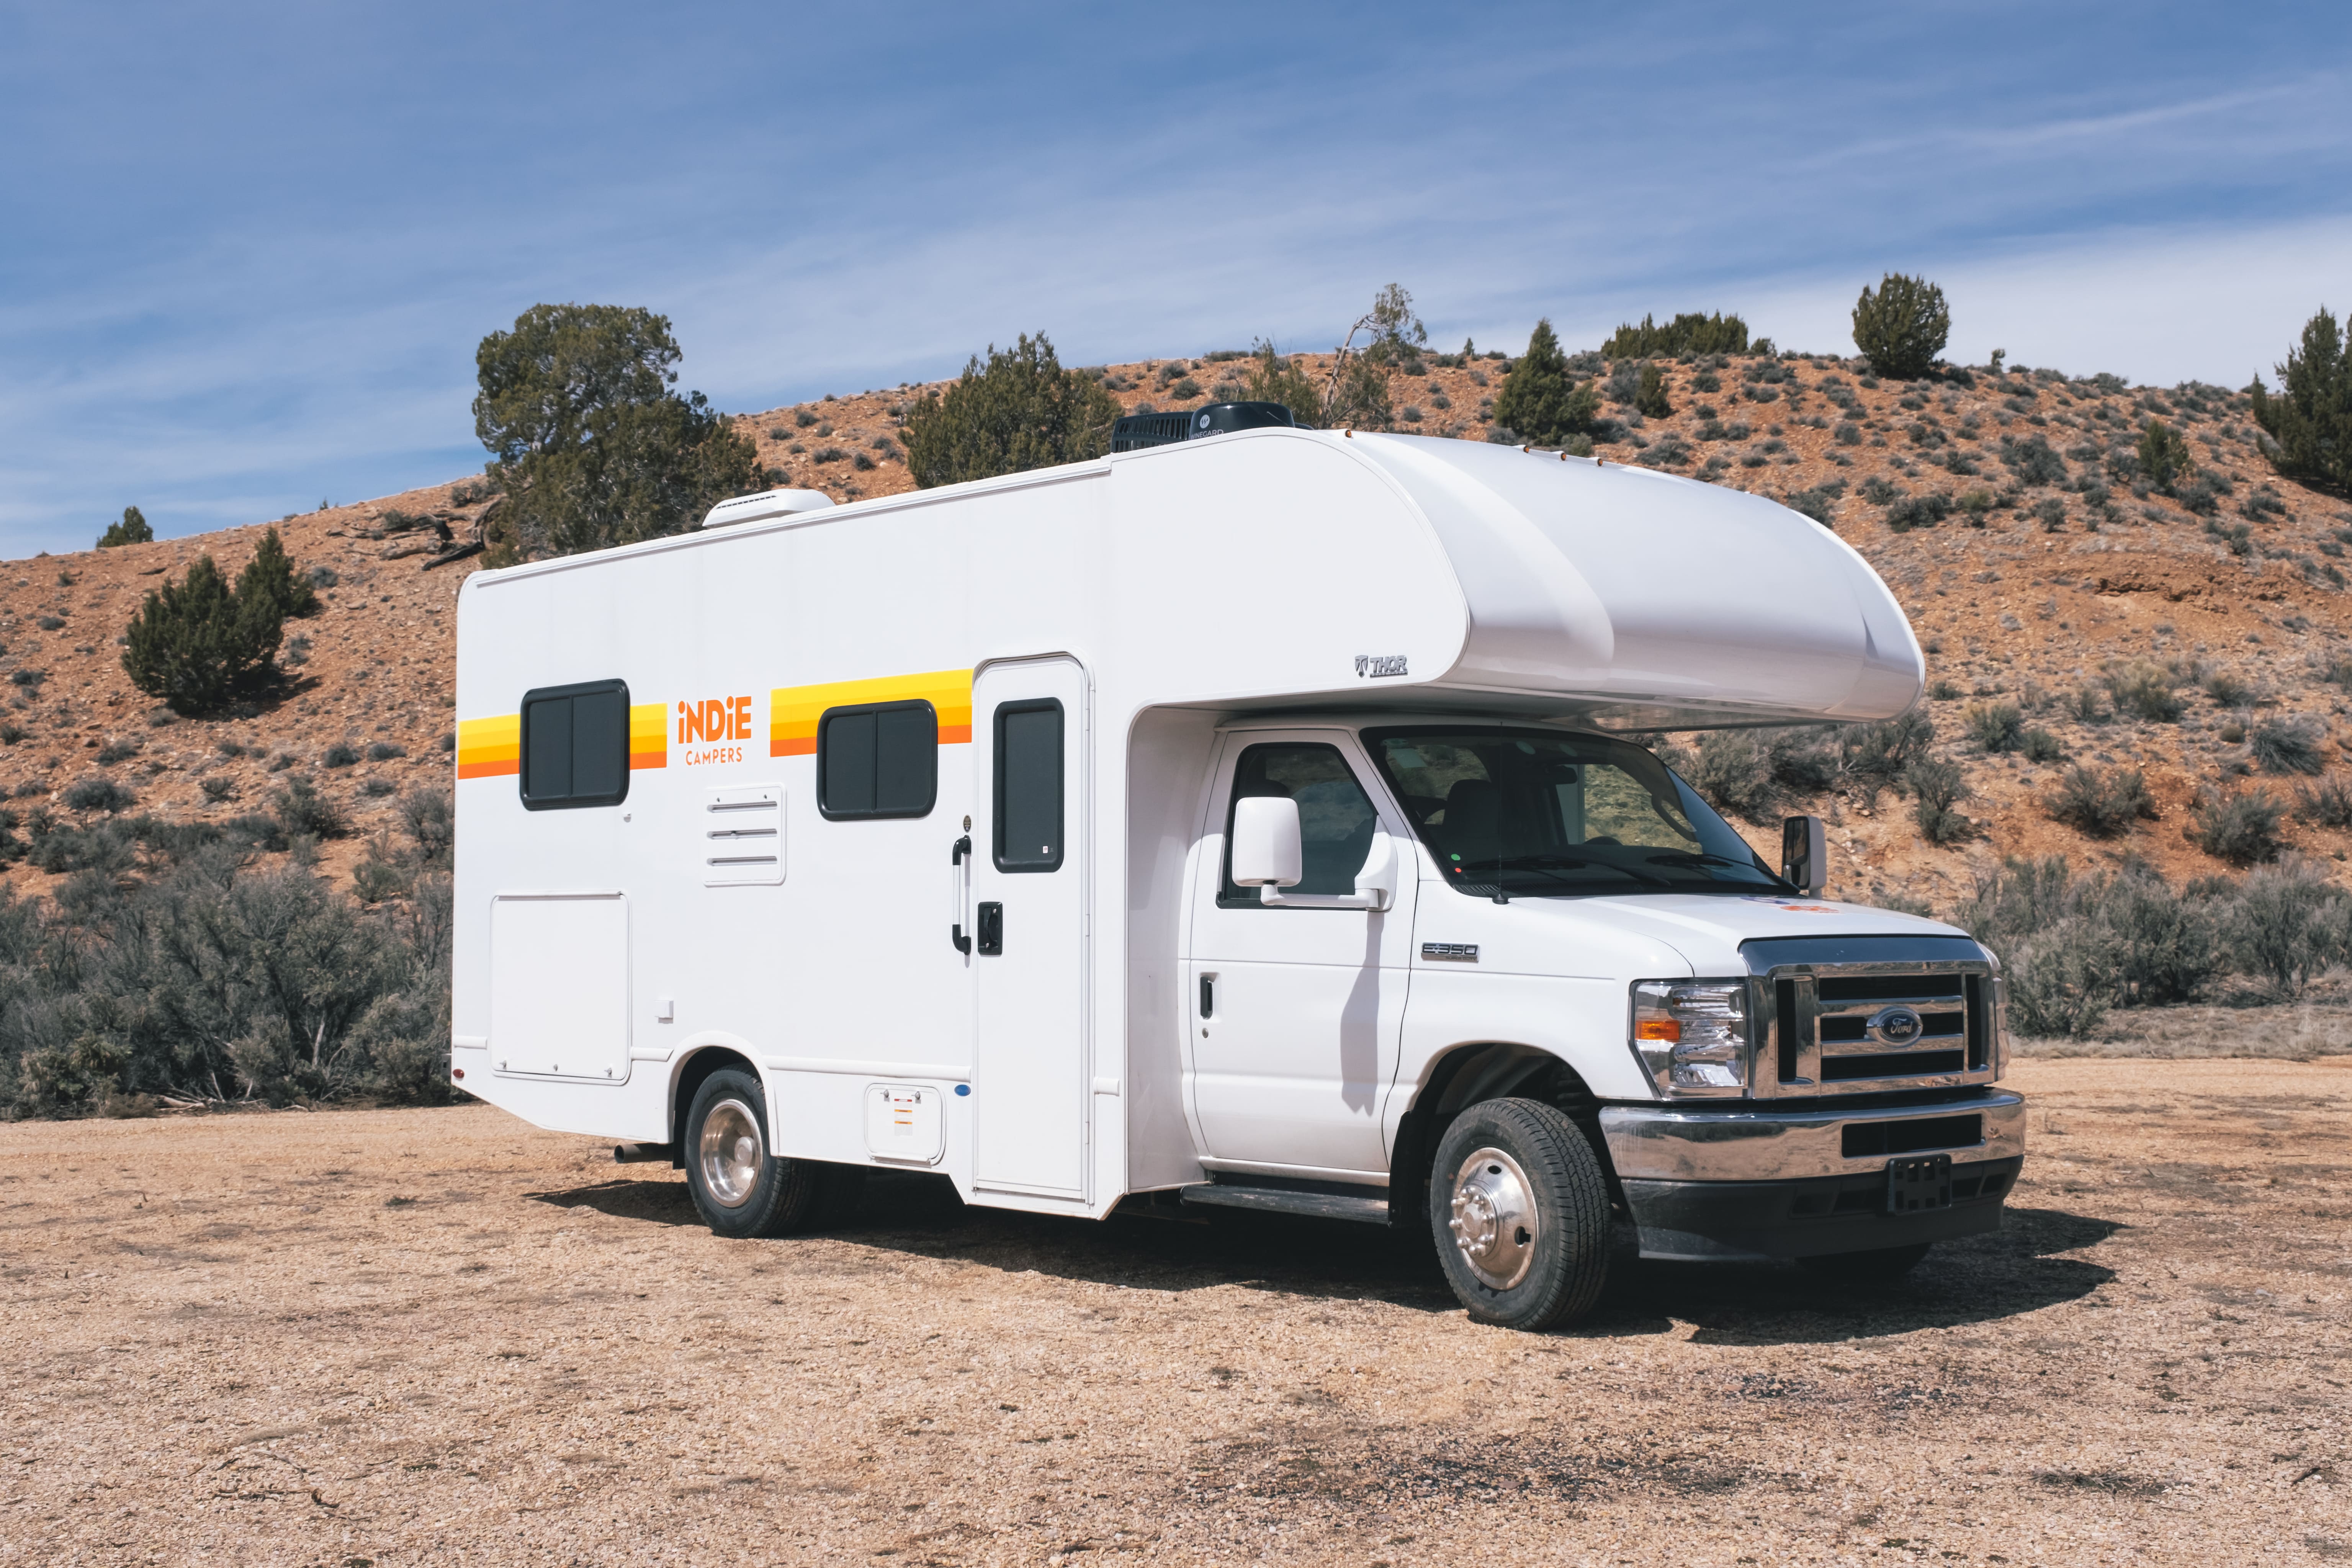 Thor Thor Motor Coach Four Winds | RV Rental - Indie Campers